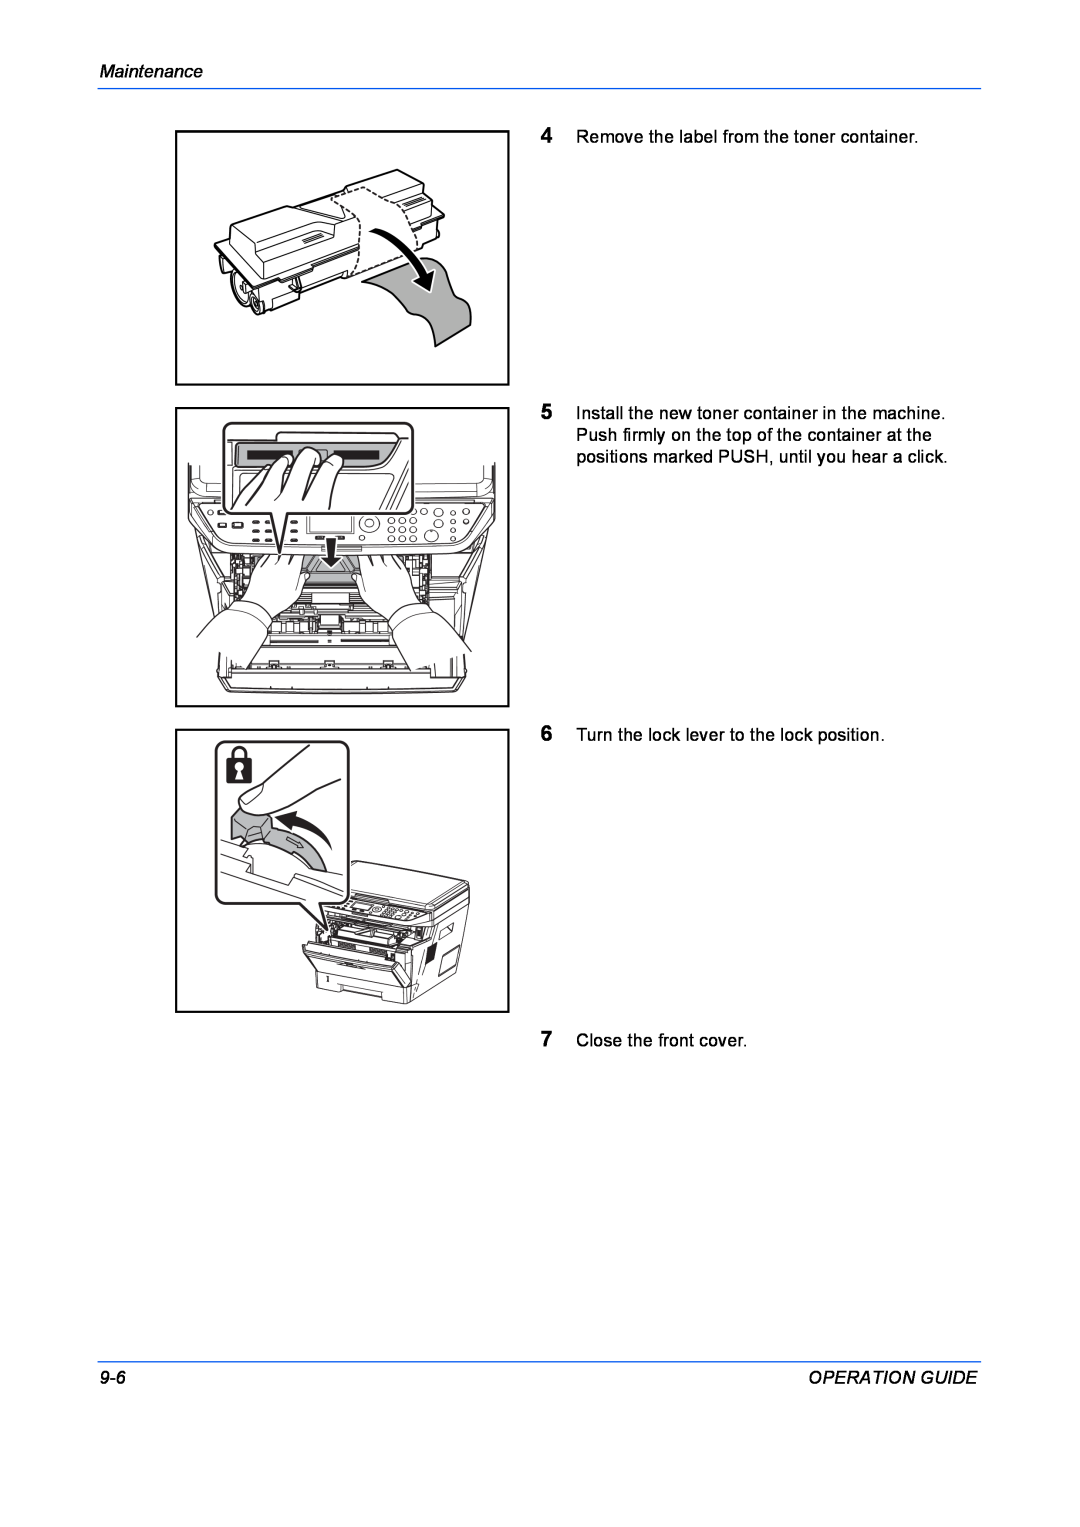 Kyocera FS-1028MFP, FS-1128MFP manual Maintenance, Remove the label from the toner container, Operation Guide 